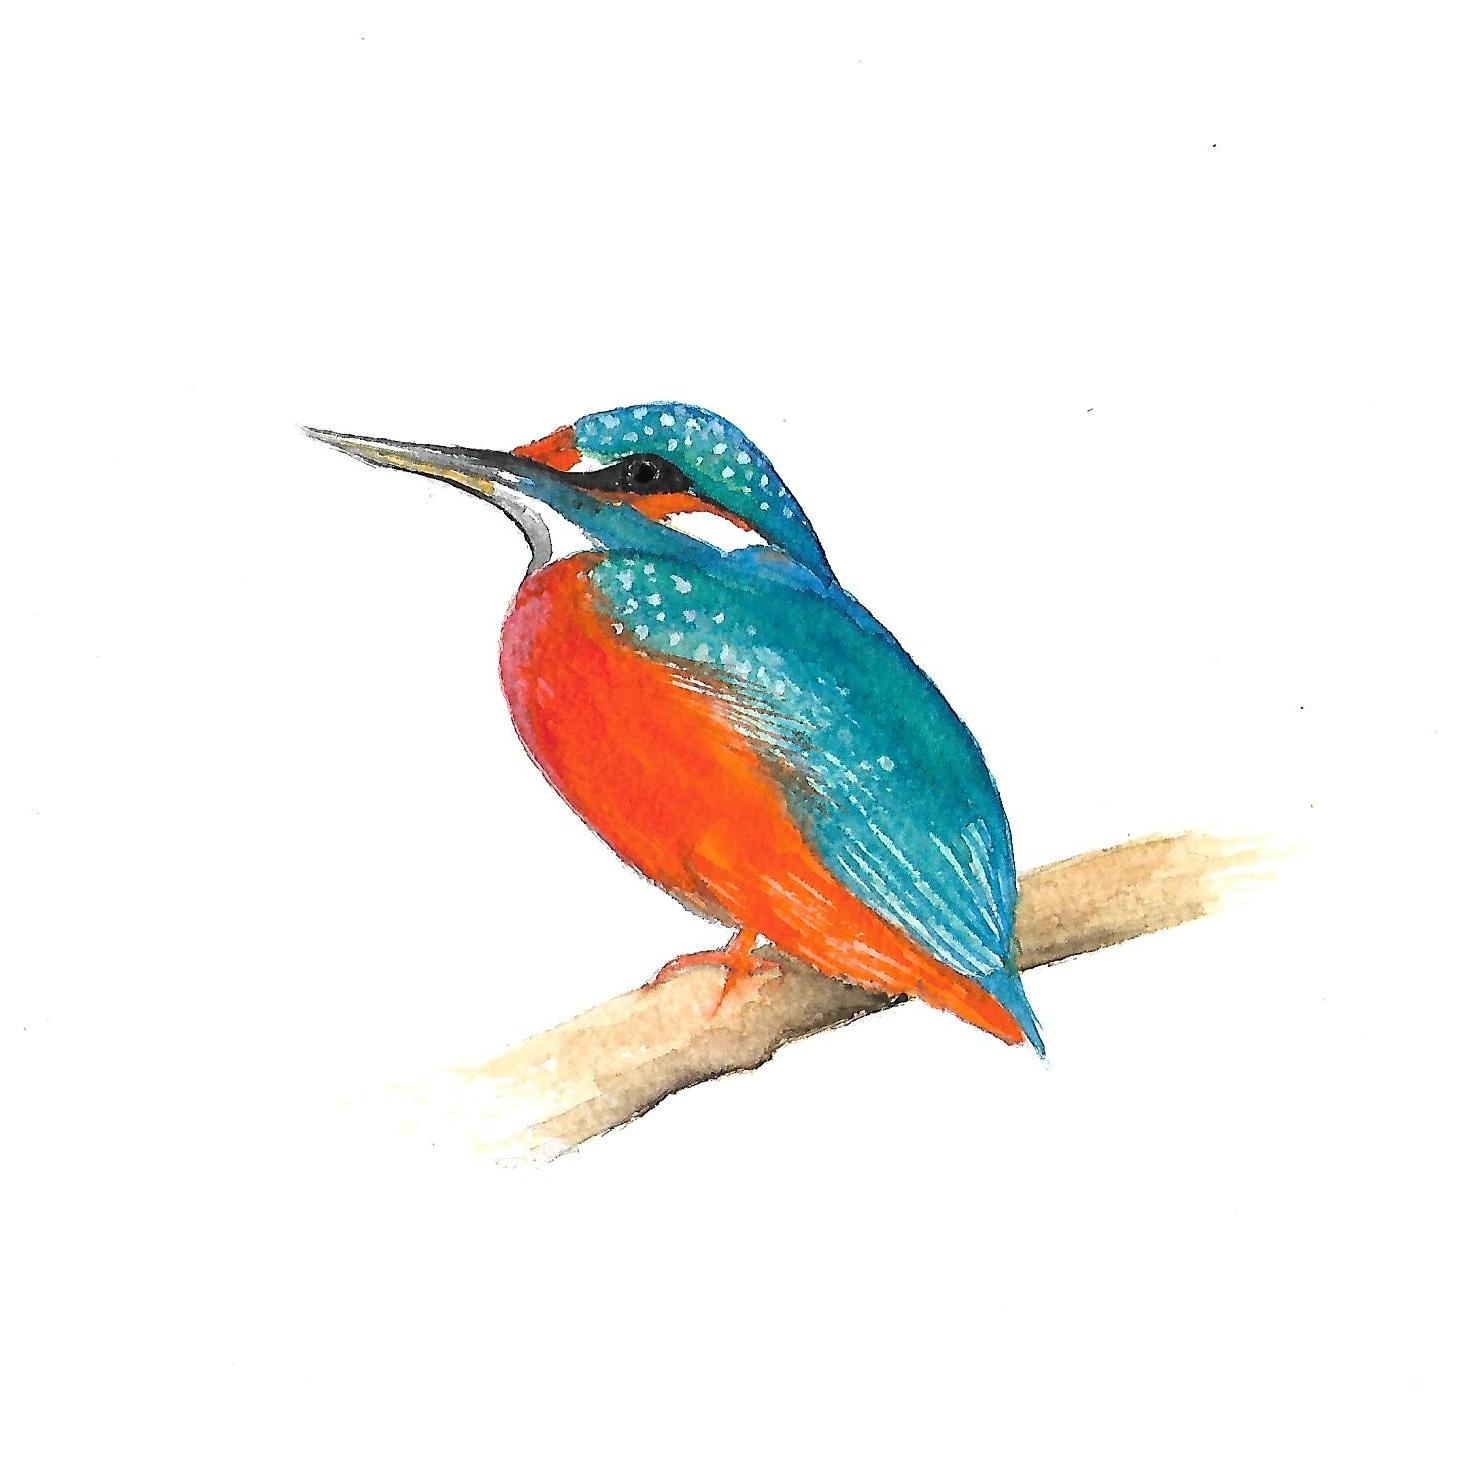 Kingfisher from the Itchen at Winnal Nature Reserve